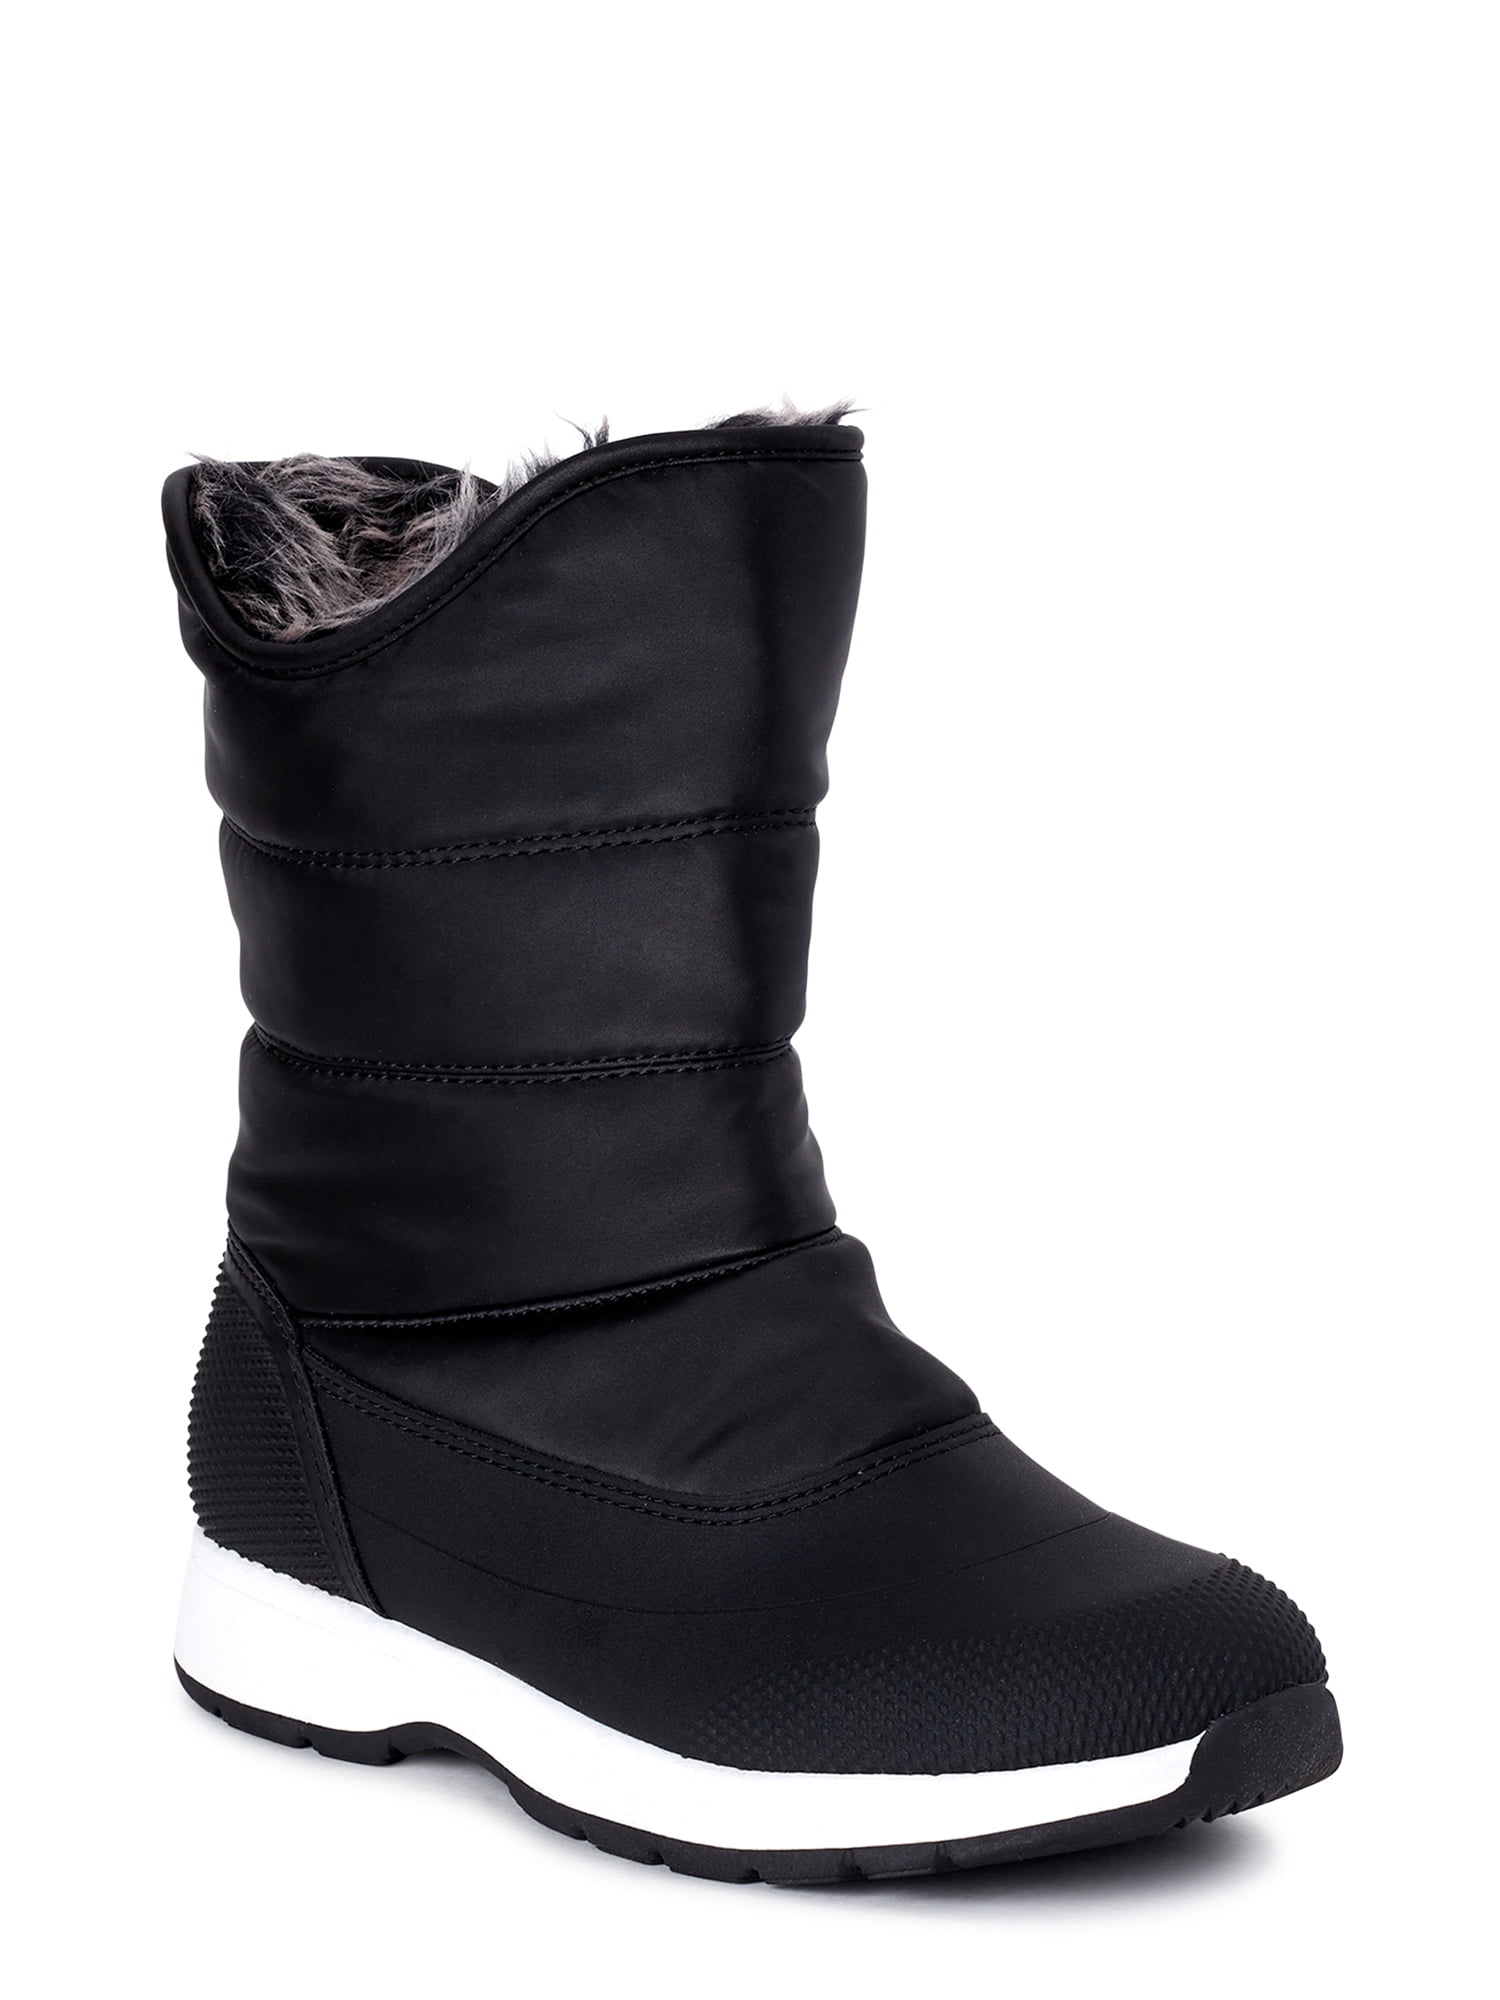 Girls Spot On H5025 Black Or Tan Synthetic Zip Up Boots 